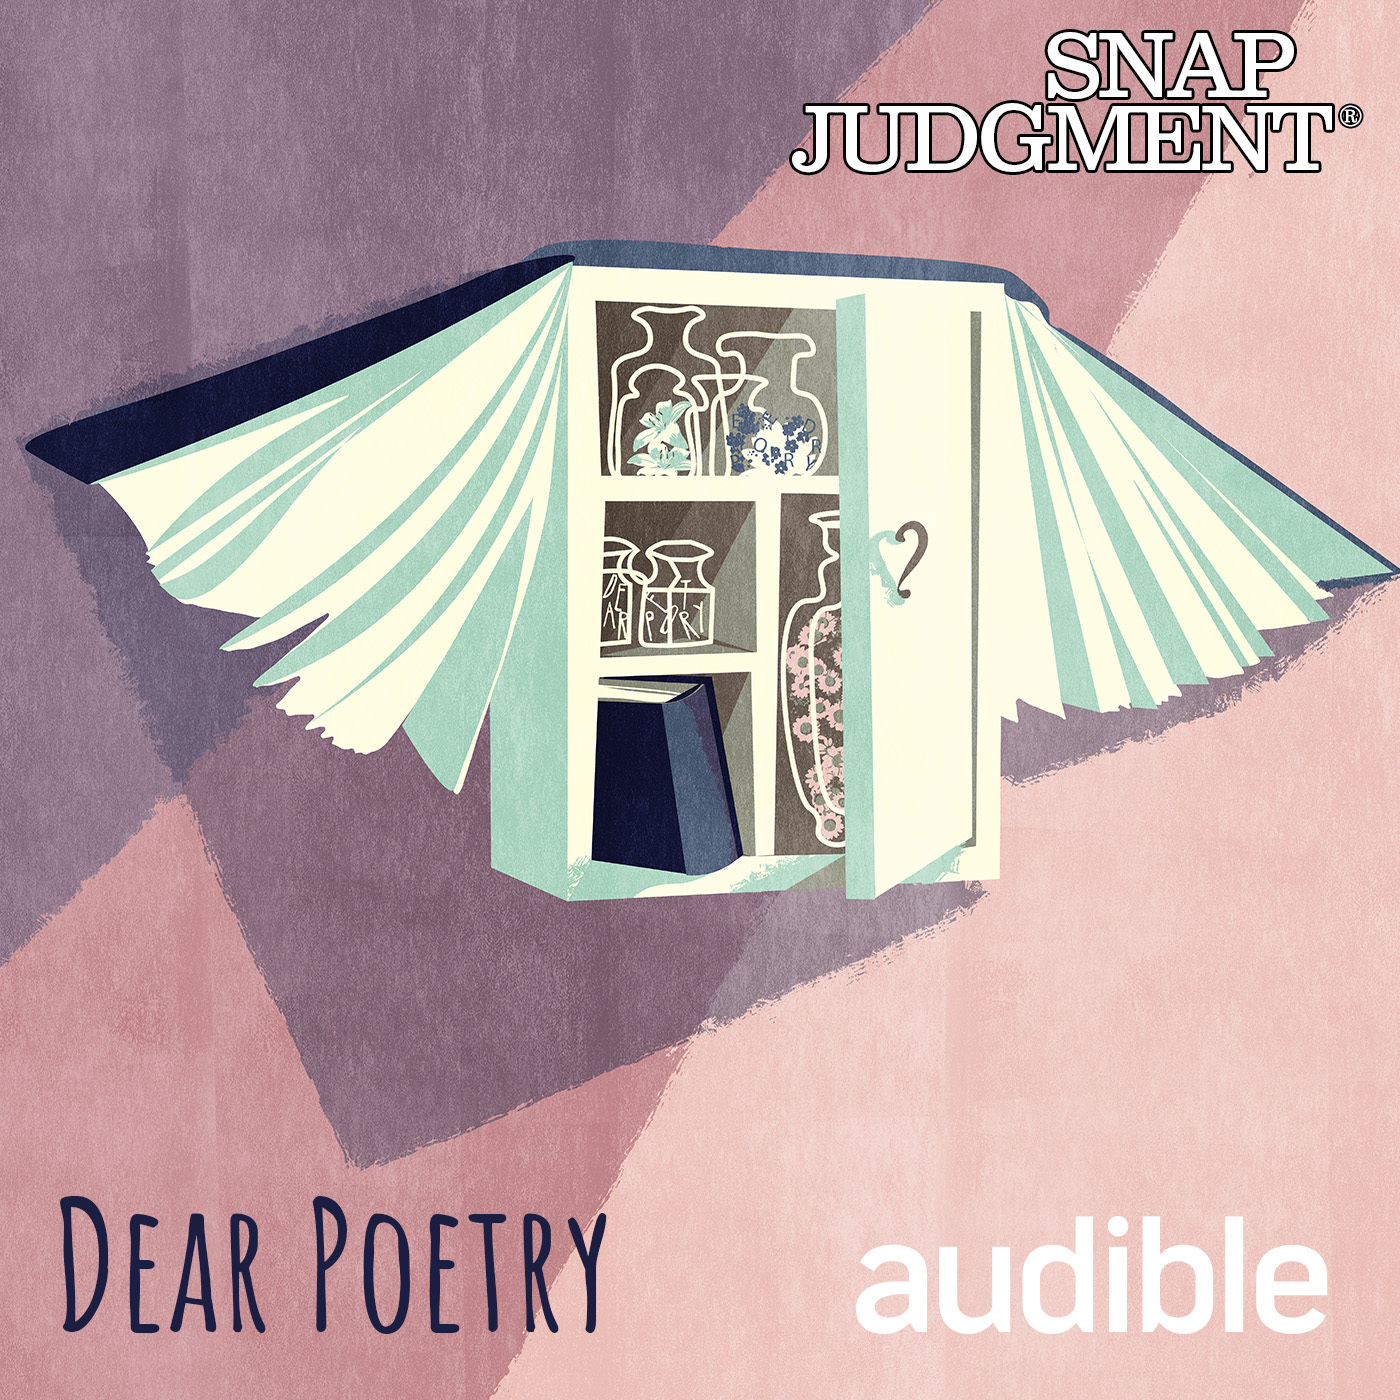 Thumbnail for "Dear Poetry ".